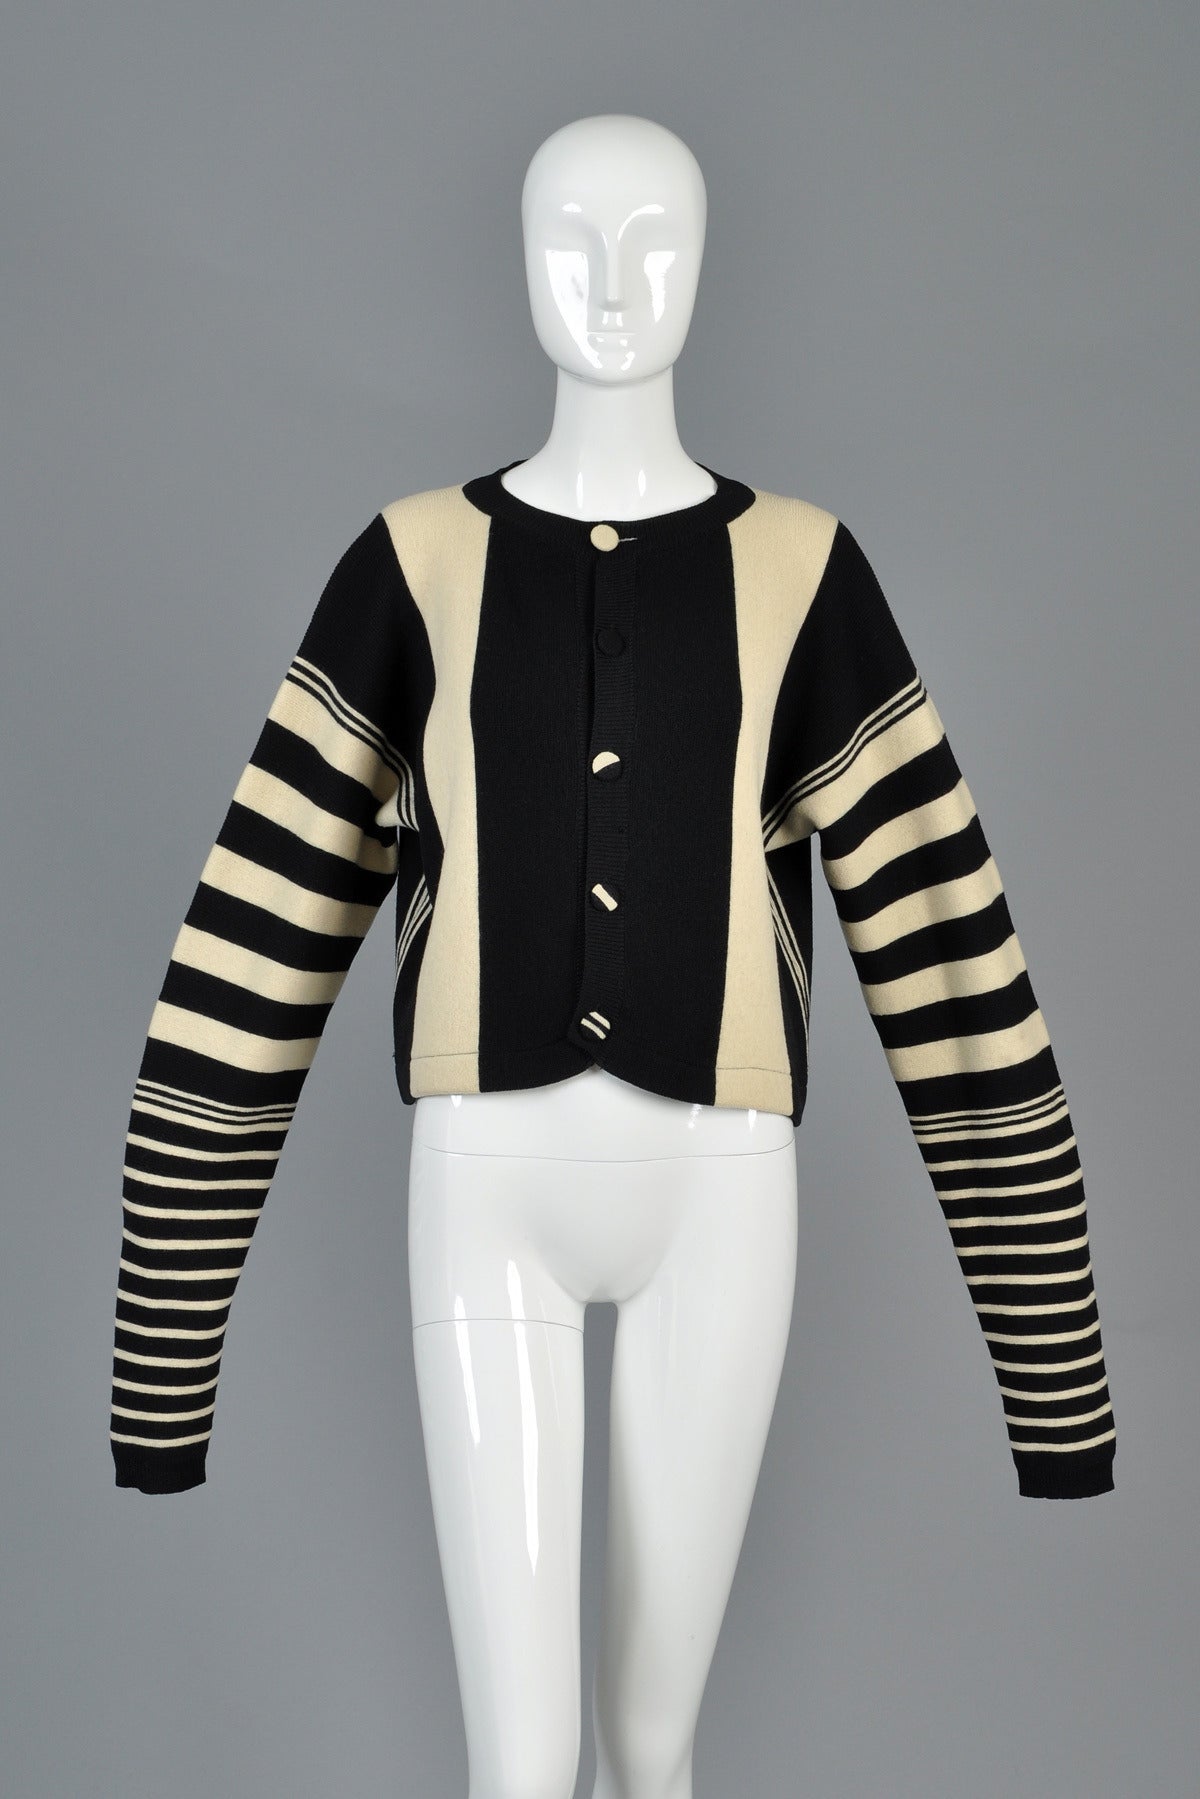 Super rare vintage 1980s striped sweater from Yohji Yamamoto’s Workshop label. Graphic black + white striped wool knit jacket with insanely long sleeves. Awesome cropped, boxy fit. Looks great buttoned or worn open. In excellent condition with the